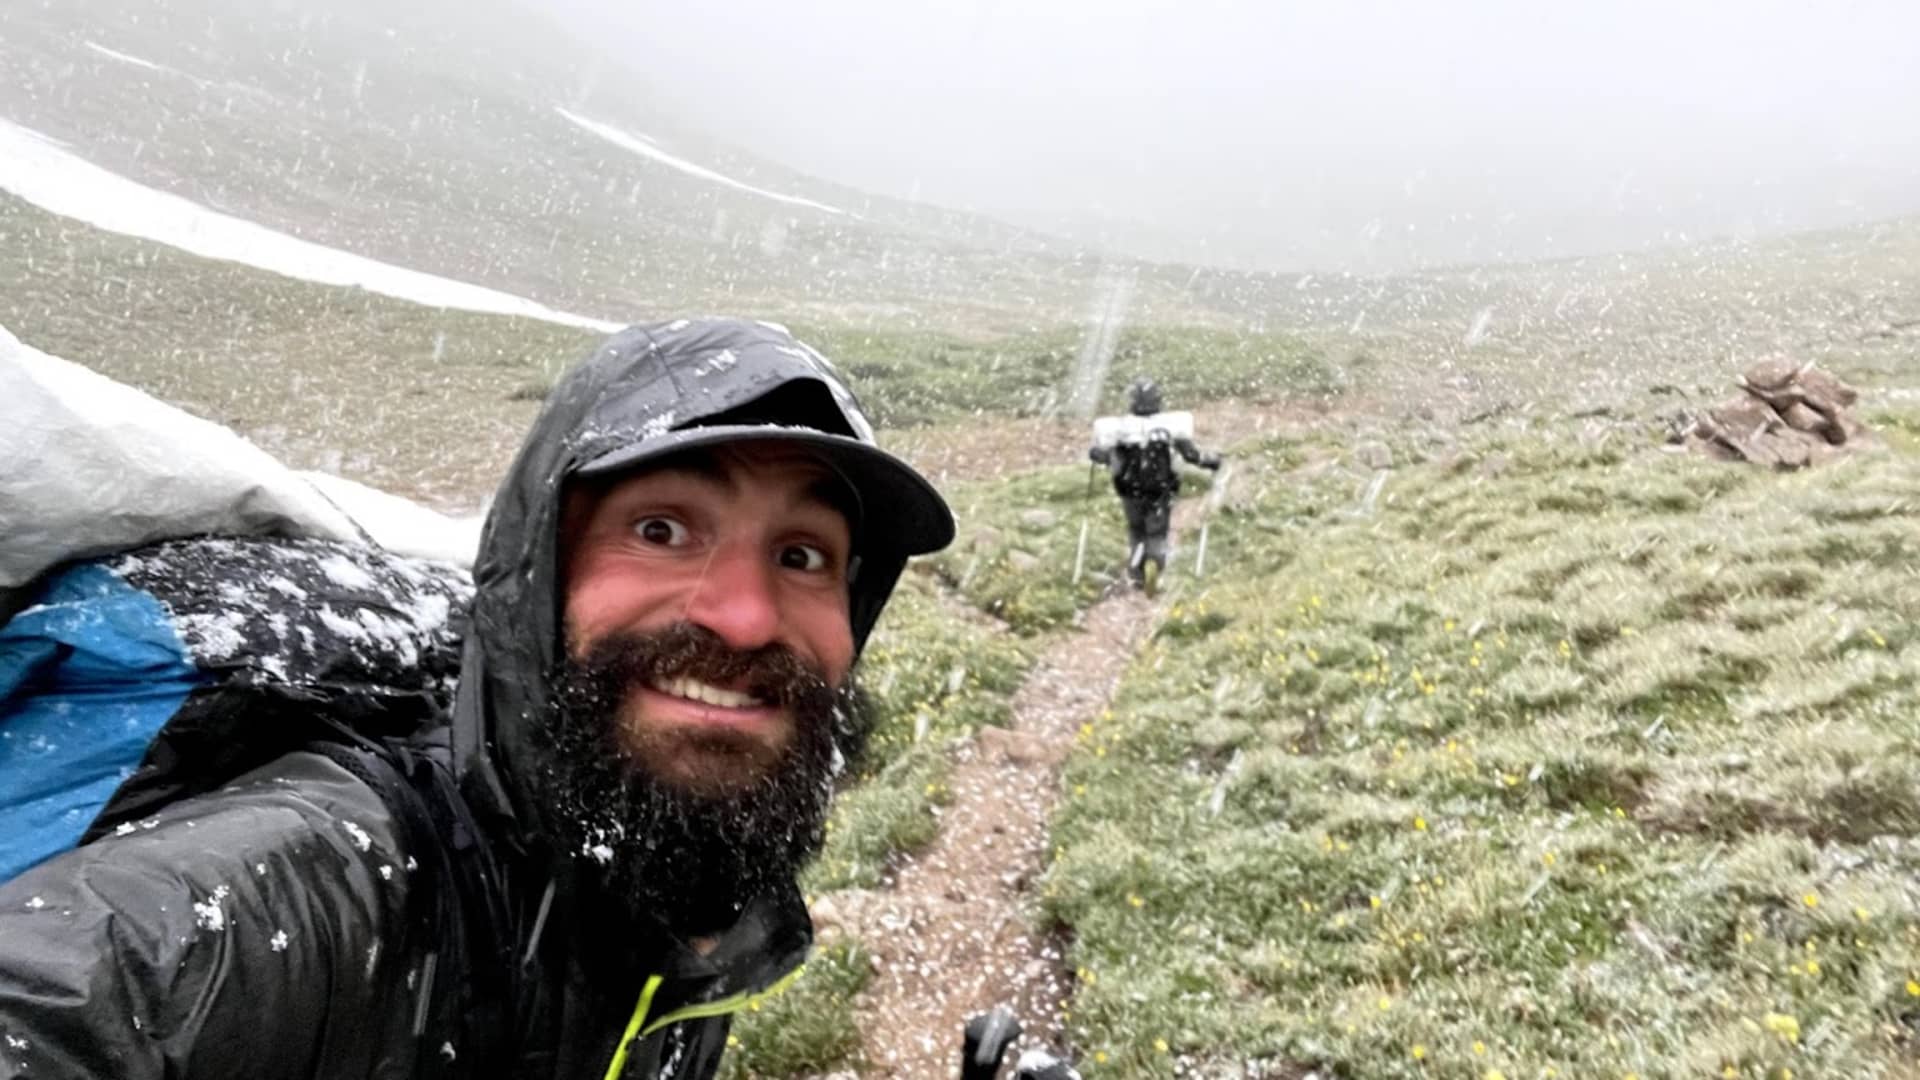 Harsh weather conditions were a norm during the couple's hike from Mexico to Canada.